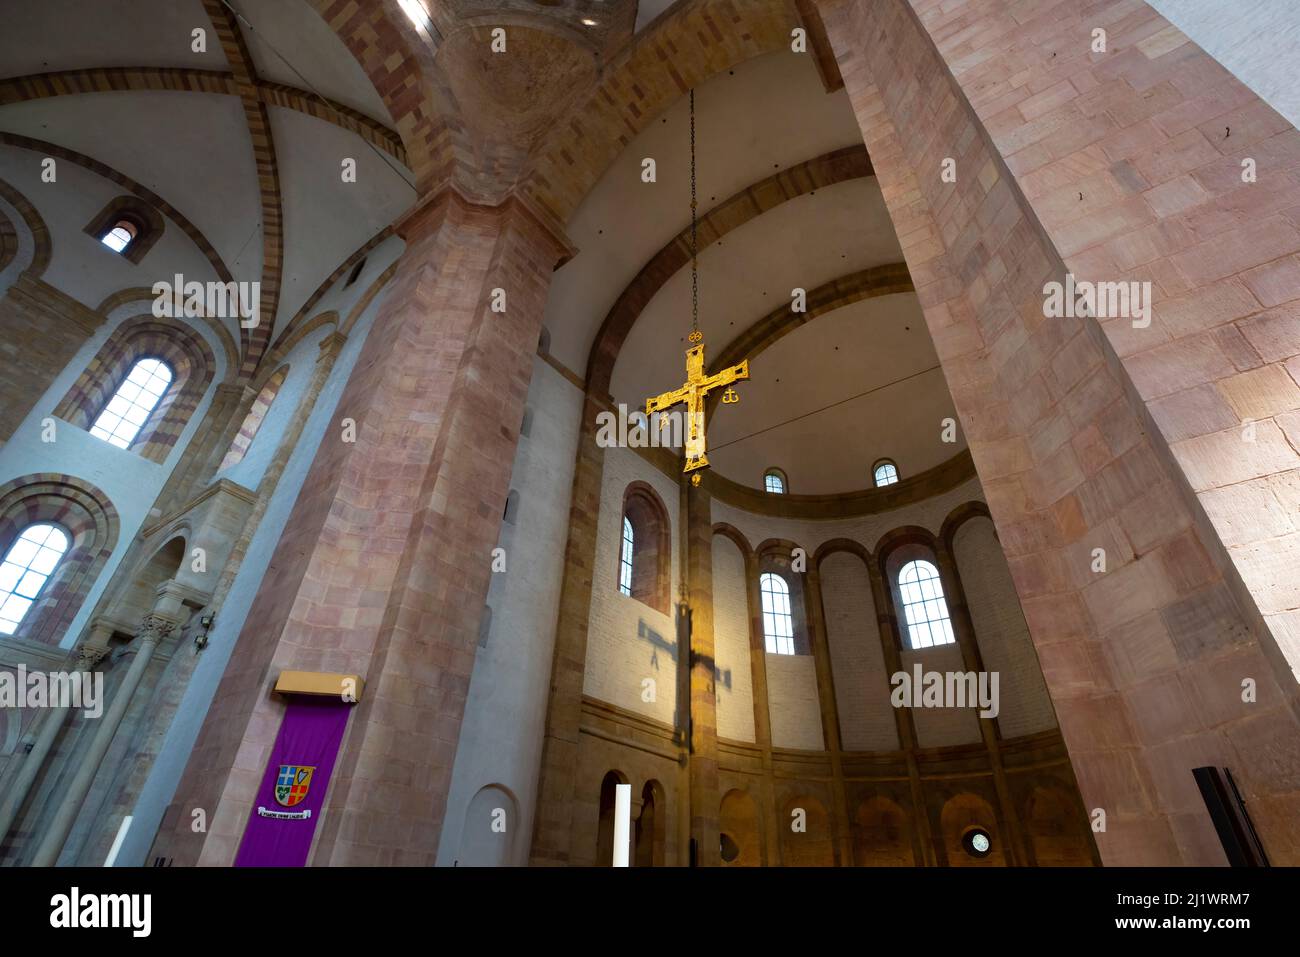 Inside the famous Speyer Cathedral in Rhineland-Palatinate, Germany. Speyer is a city in Rhineland-Palatinate in Germany with approximately 50,000 inh Stock Photo